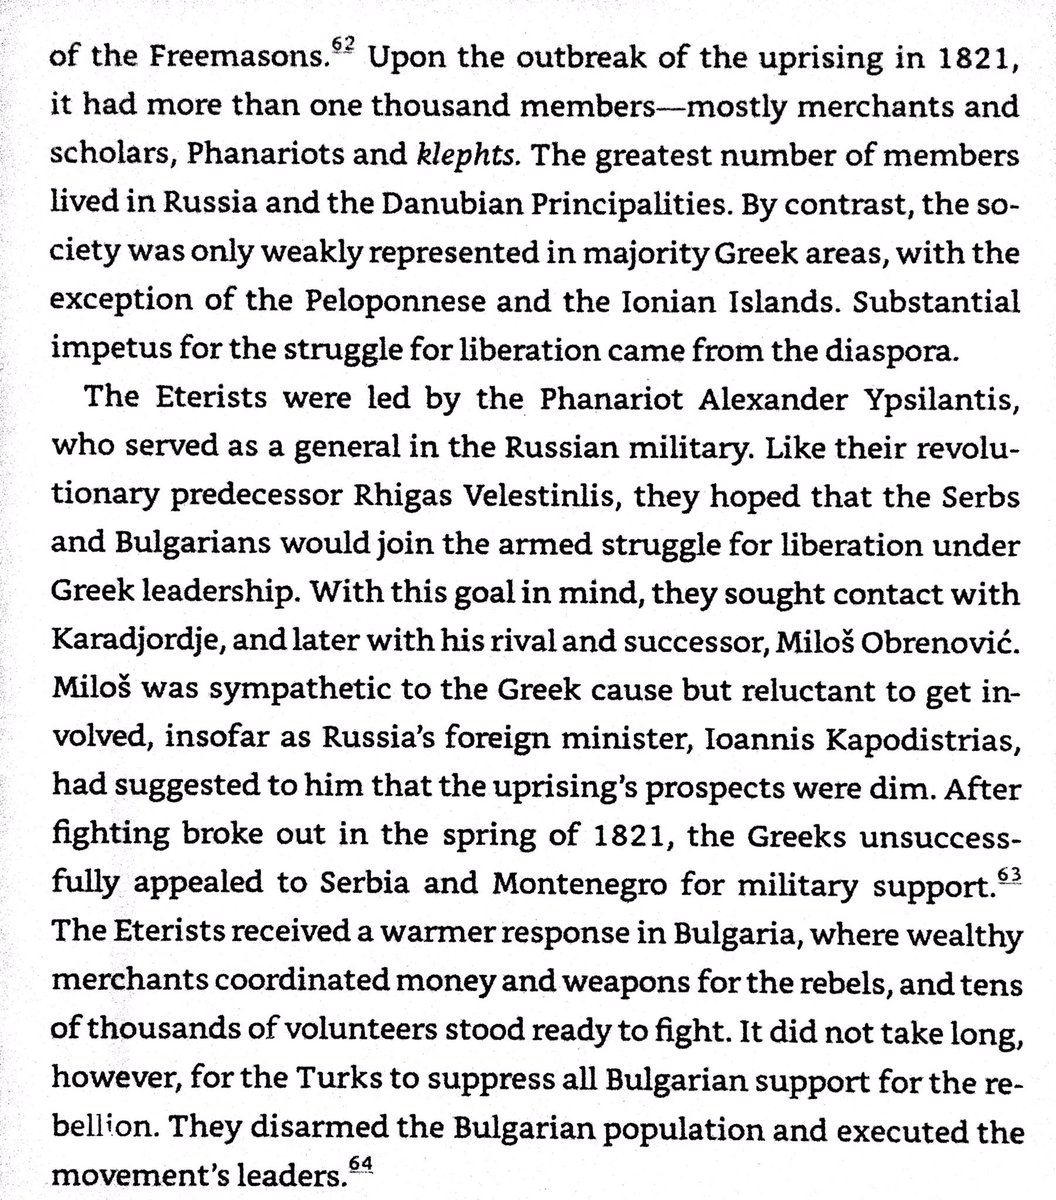 Napoleonic Wars had led the Greeks to arm their merchant ships, leaving them a great deal of artillery. Greek diaspora formed secret society to prepare revolt against Ottomans. Serbs & Montenegrins didn’t help, but Bulgarians did. Turkish landholders in Greece resented by Greeks.